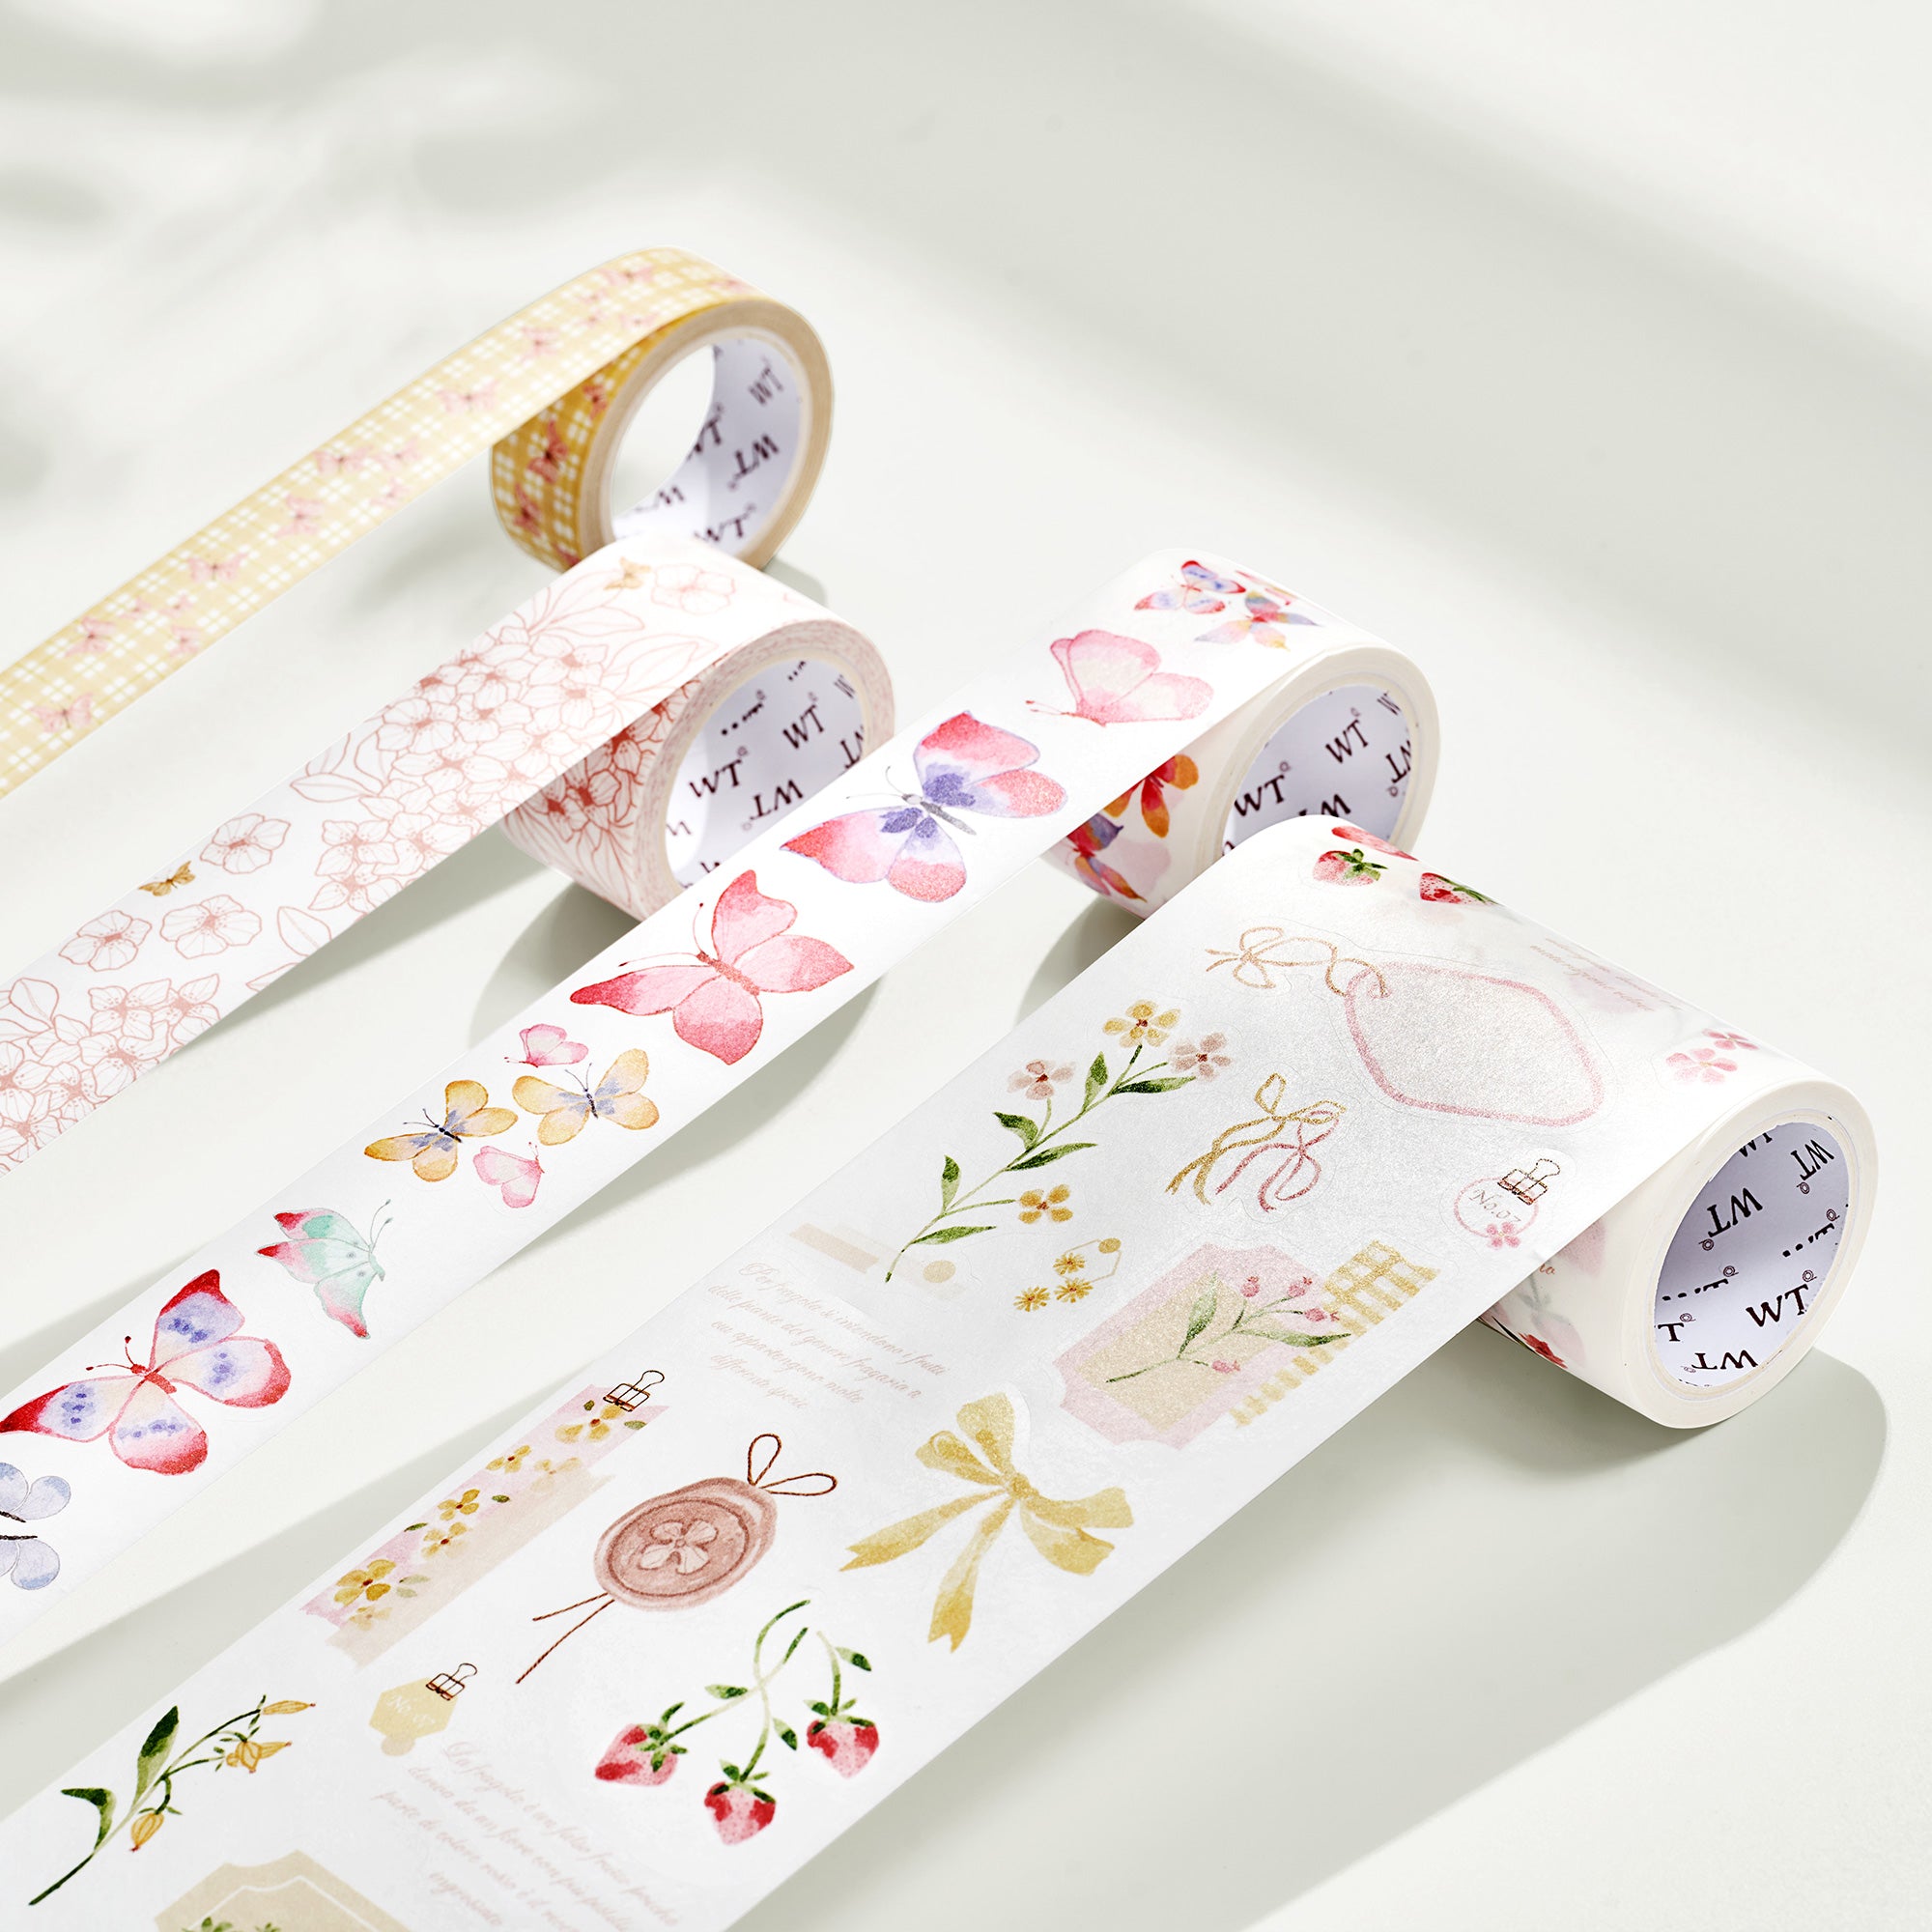 Fragole & Farfalle Washi Tape Sticker Set | The Washi Tape Shop. Beautiful Washi and Decorative Tape For Bullet Journals, Gift Wrapping, Planner Decoration and DIY Projects